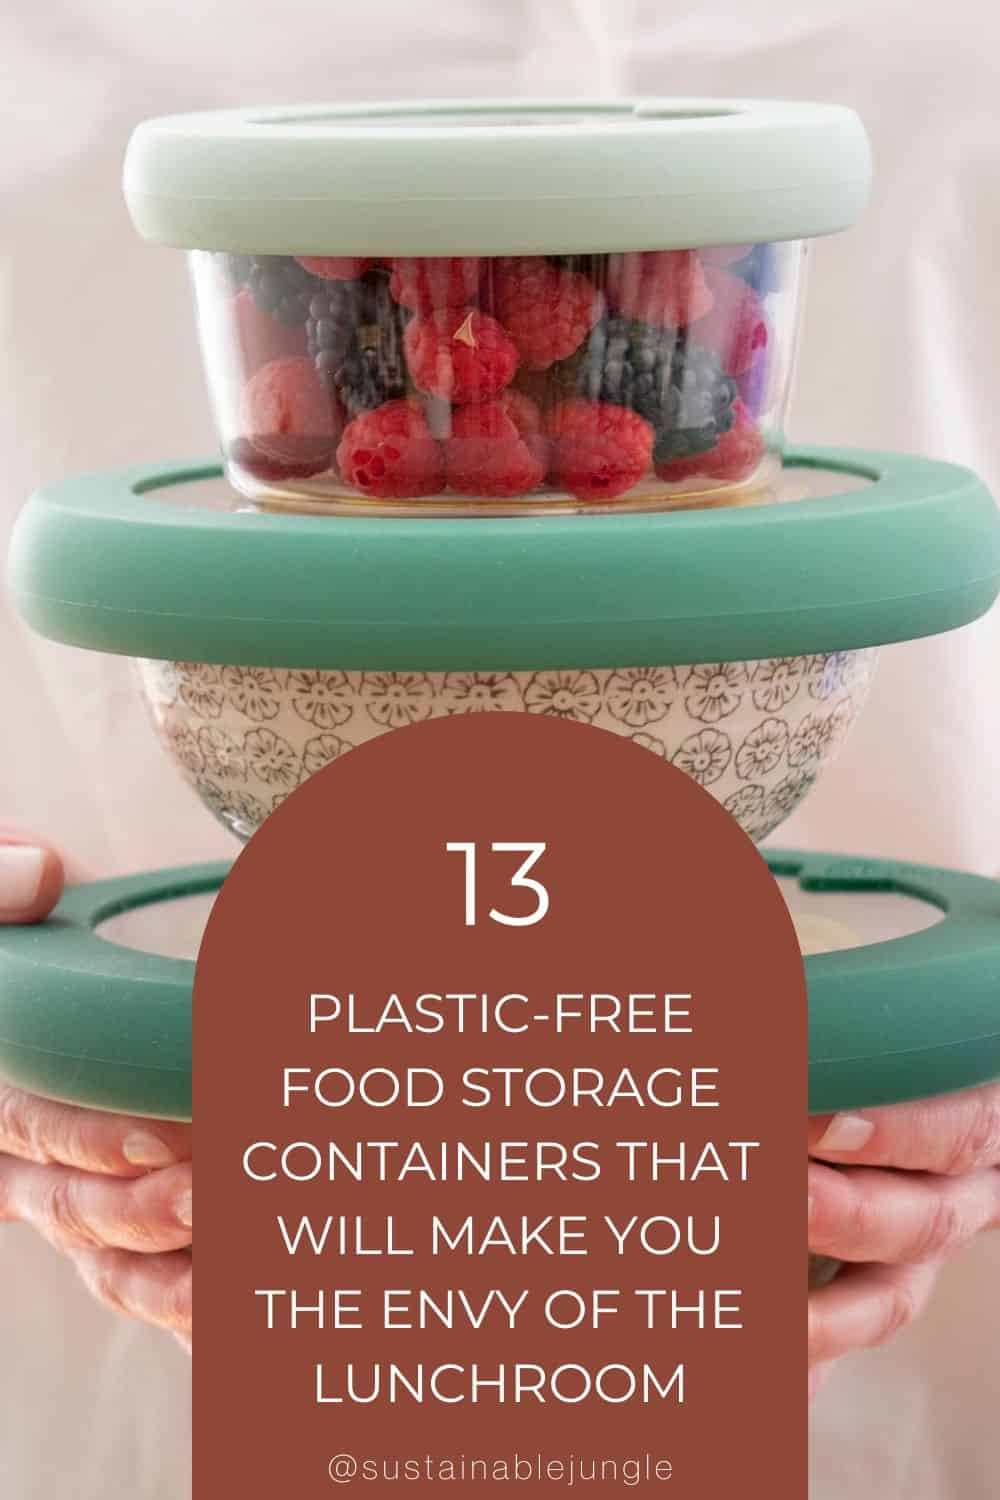 13 Plastic-Free Food Storage Containers That Will Make You The Envy Of The Lunchroom Image by Food Huggers #plasticfreefoodstorage #plasticfreefoodstoragecontainers #nonplasticfoodstorage #bestnonplasticfoodstoragecontainers #plasticfreetupperware #nonplastictupperware #sustainablejungle